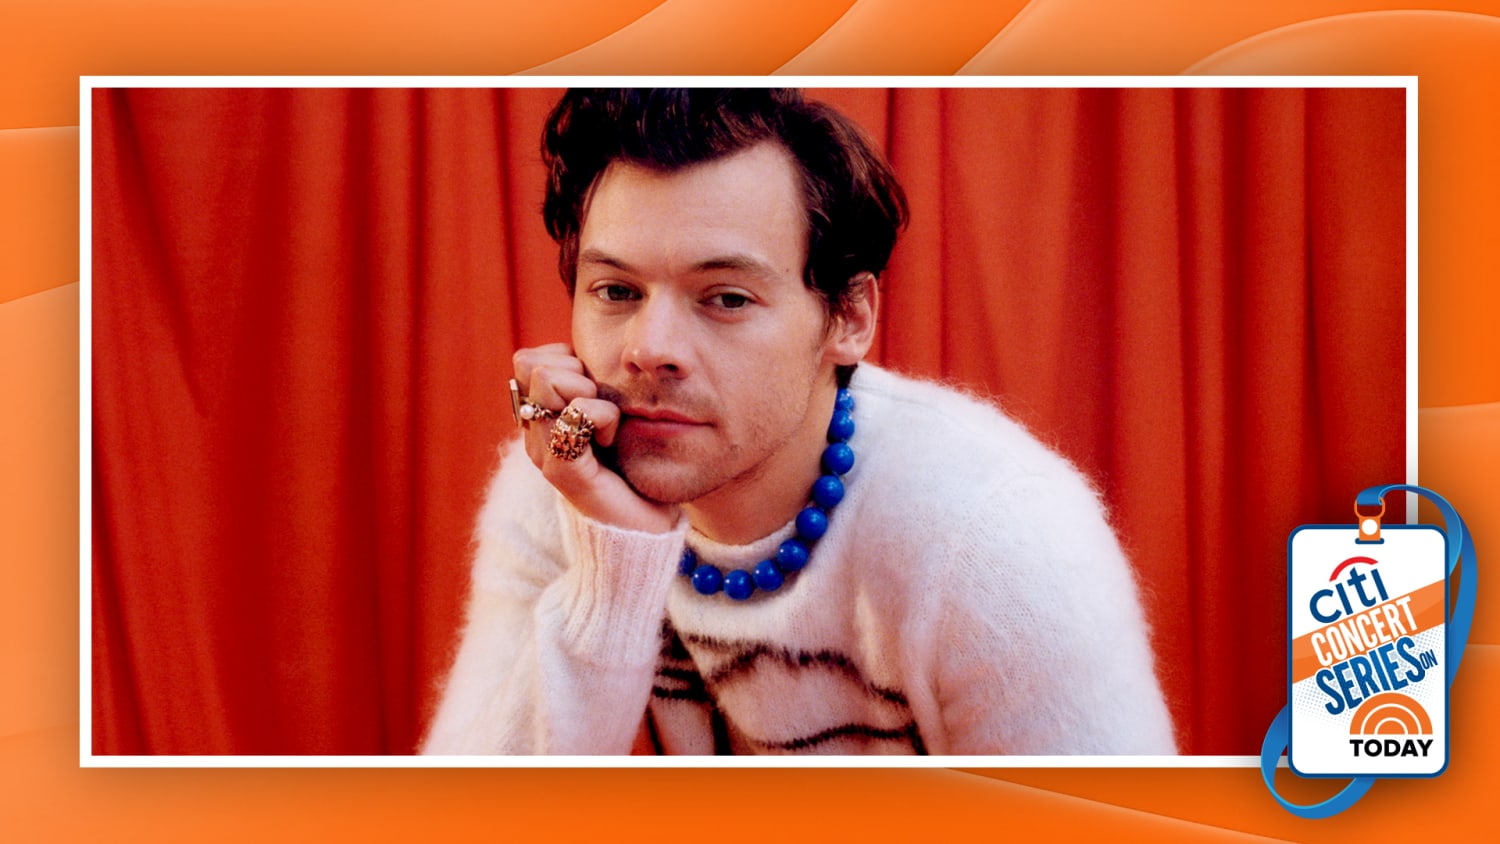 Harry Styles TODAY show concert: See all his performances